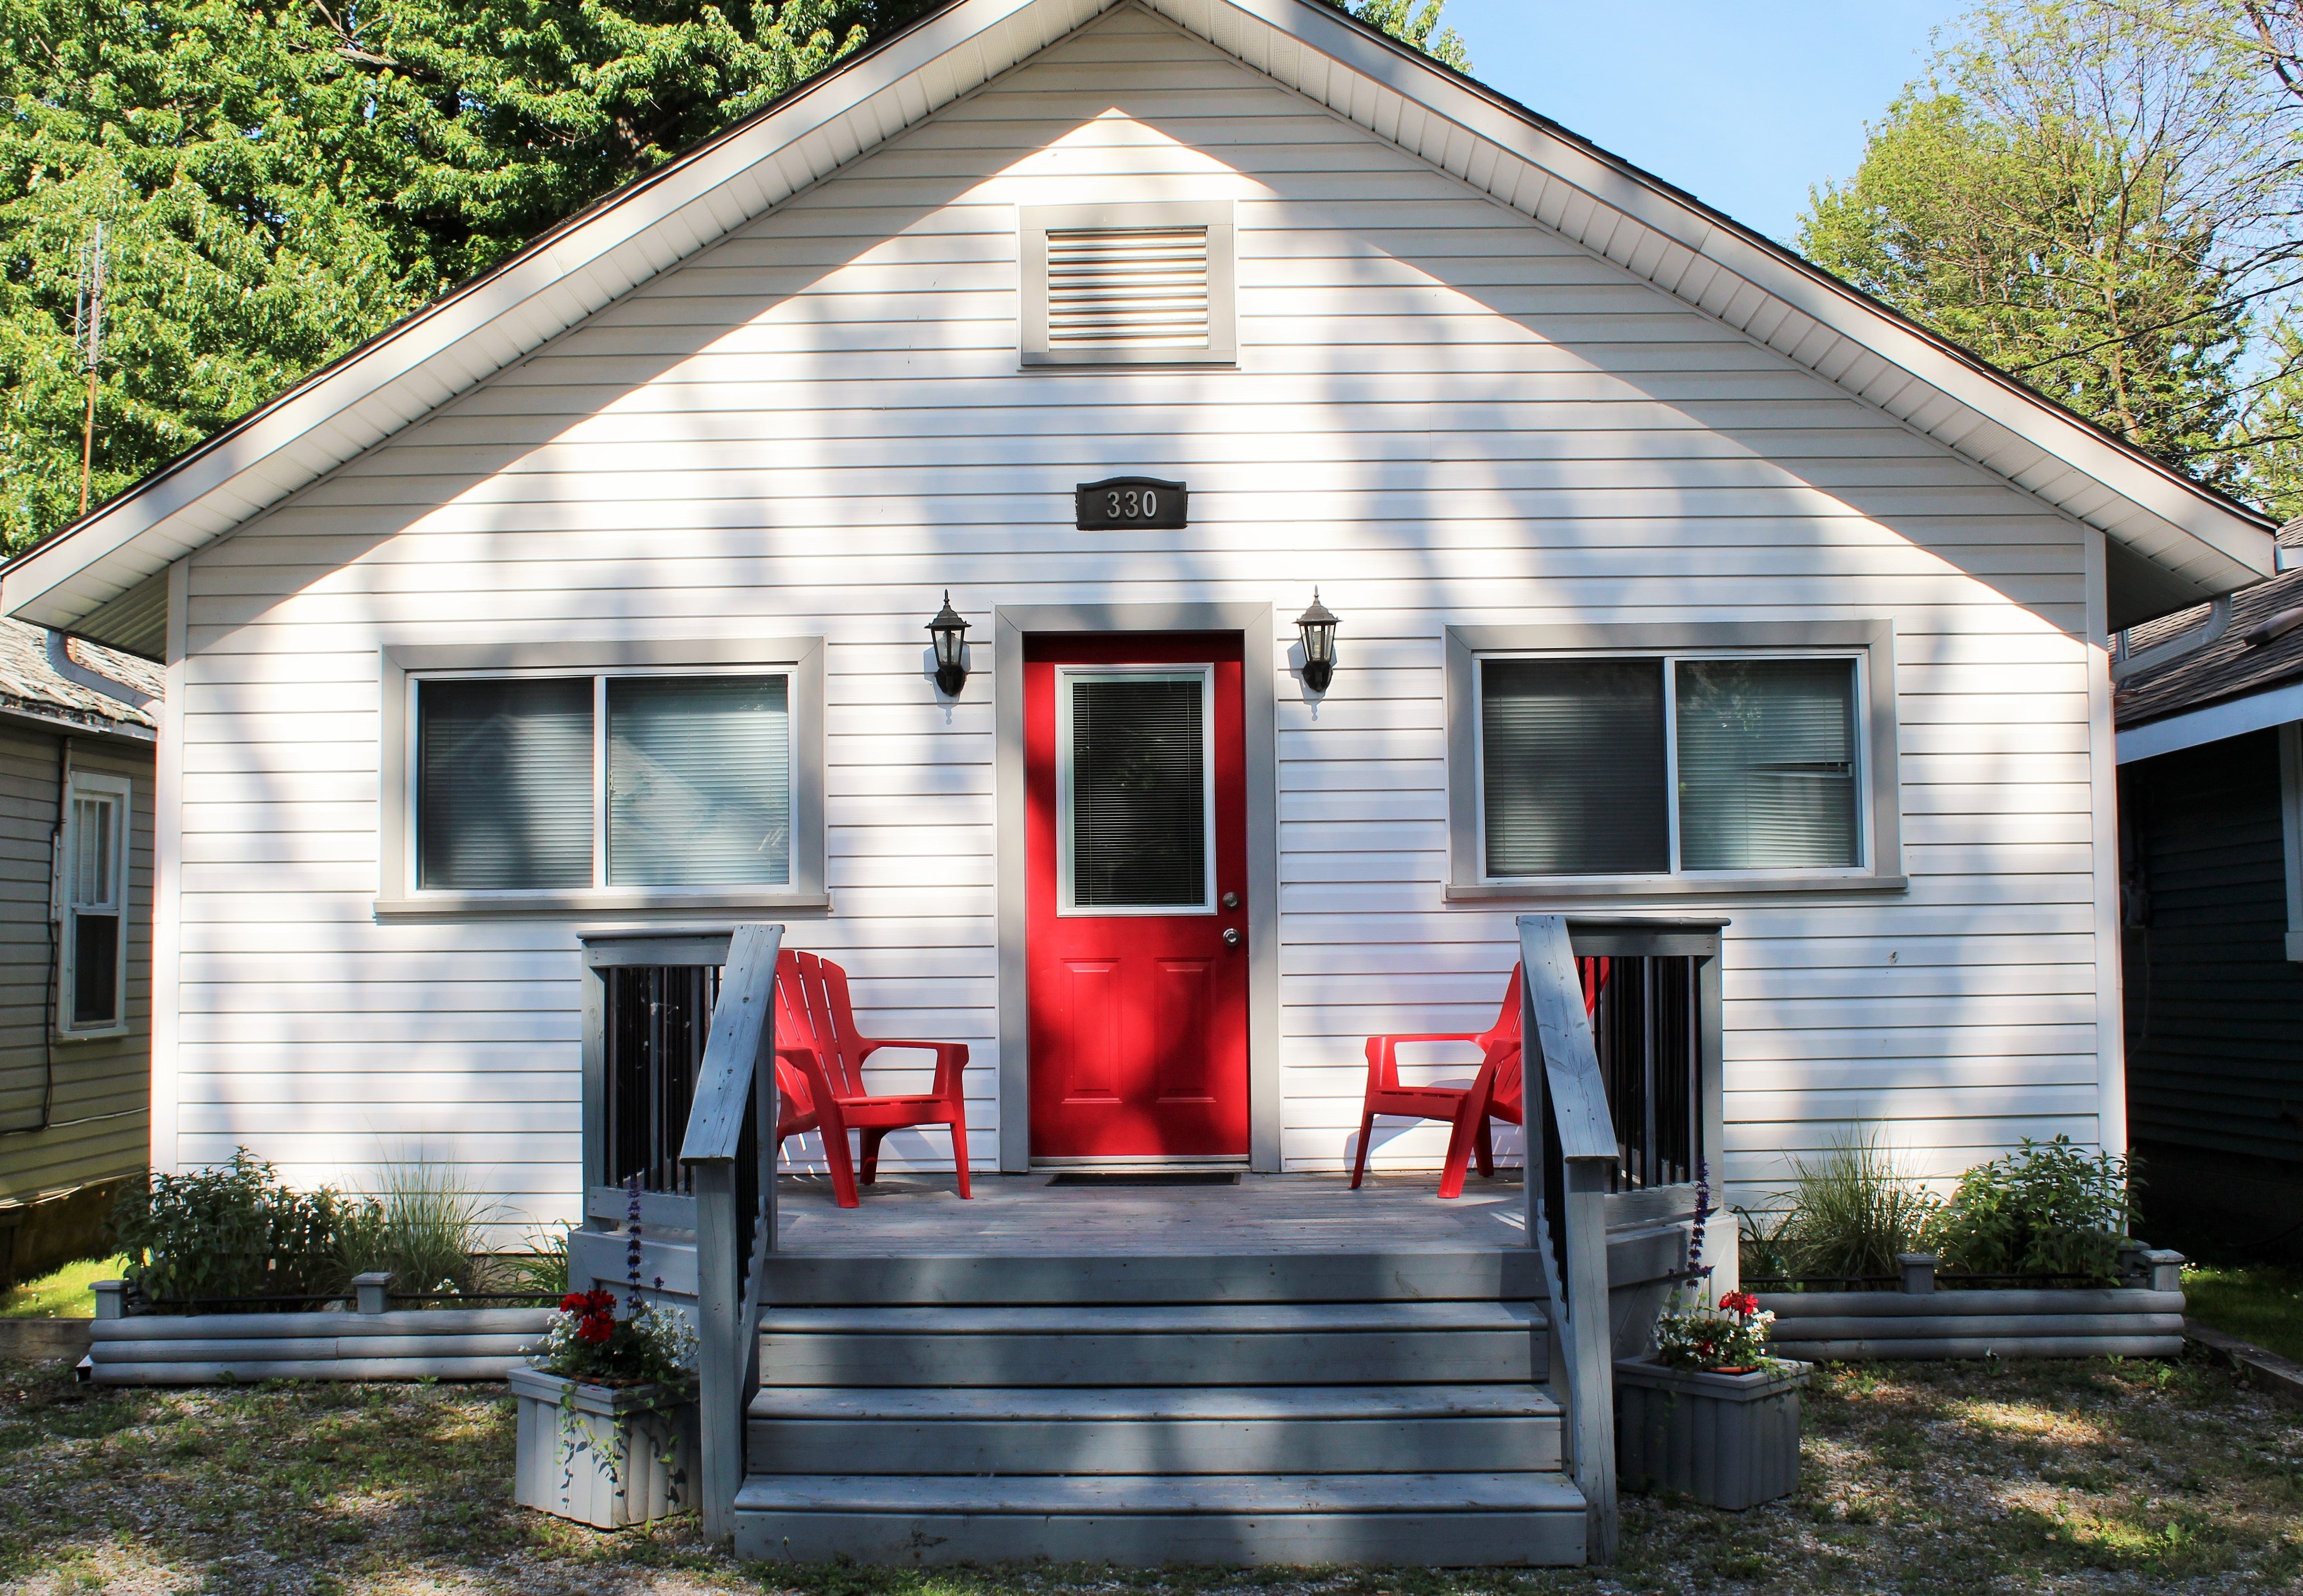 Crystal Beach Property Management - Beebalm Cottage